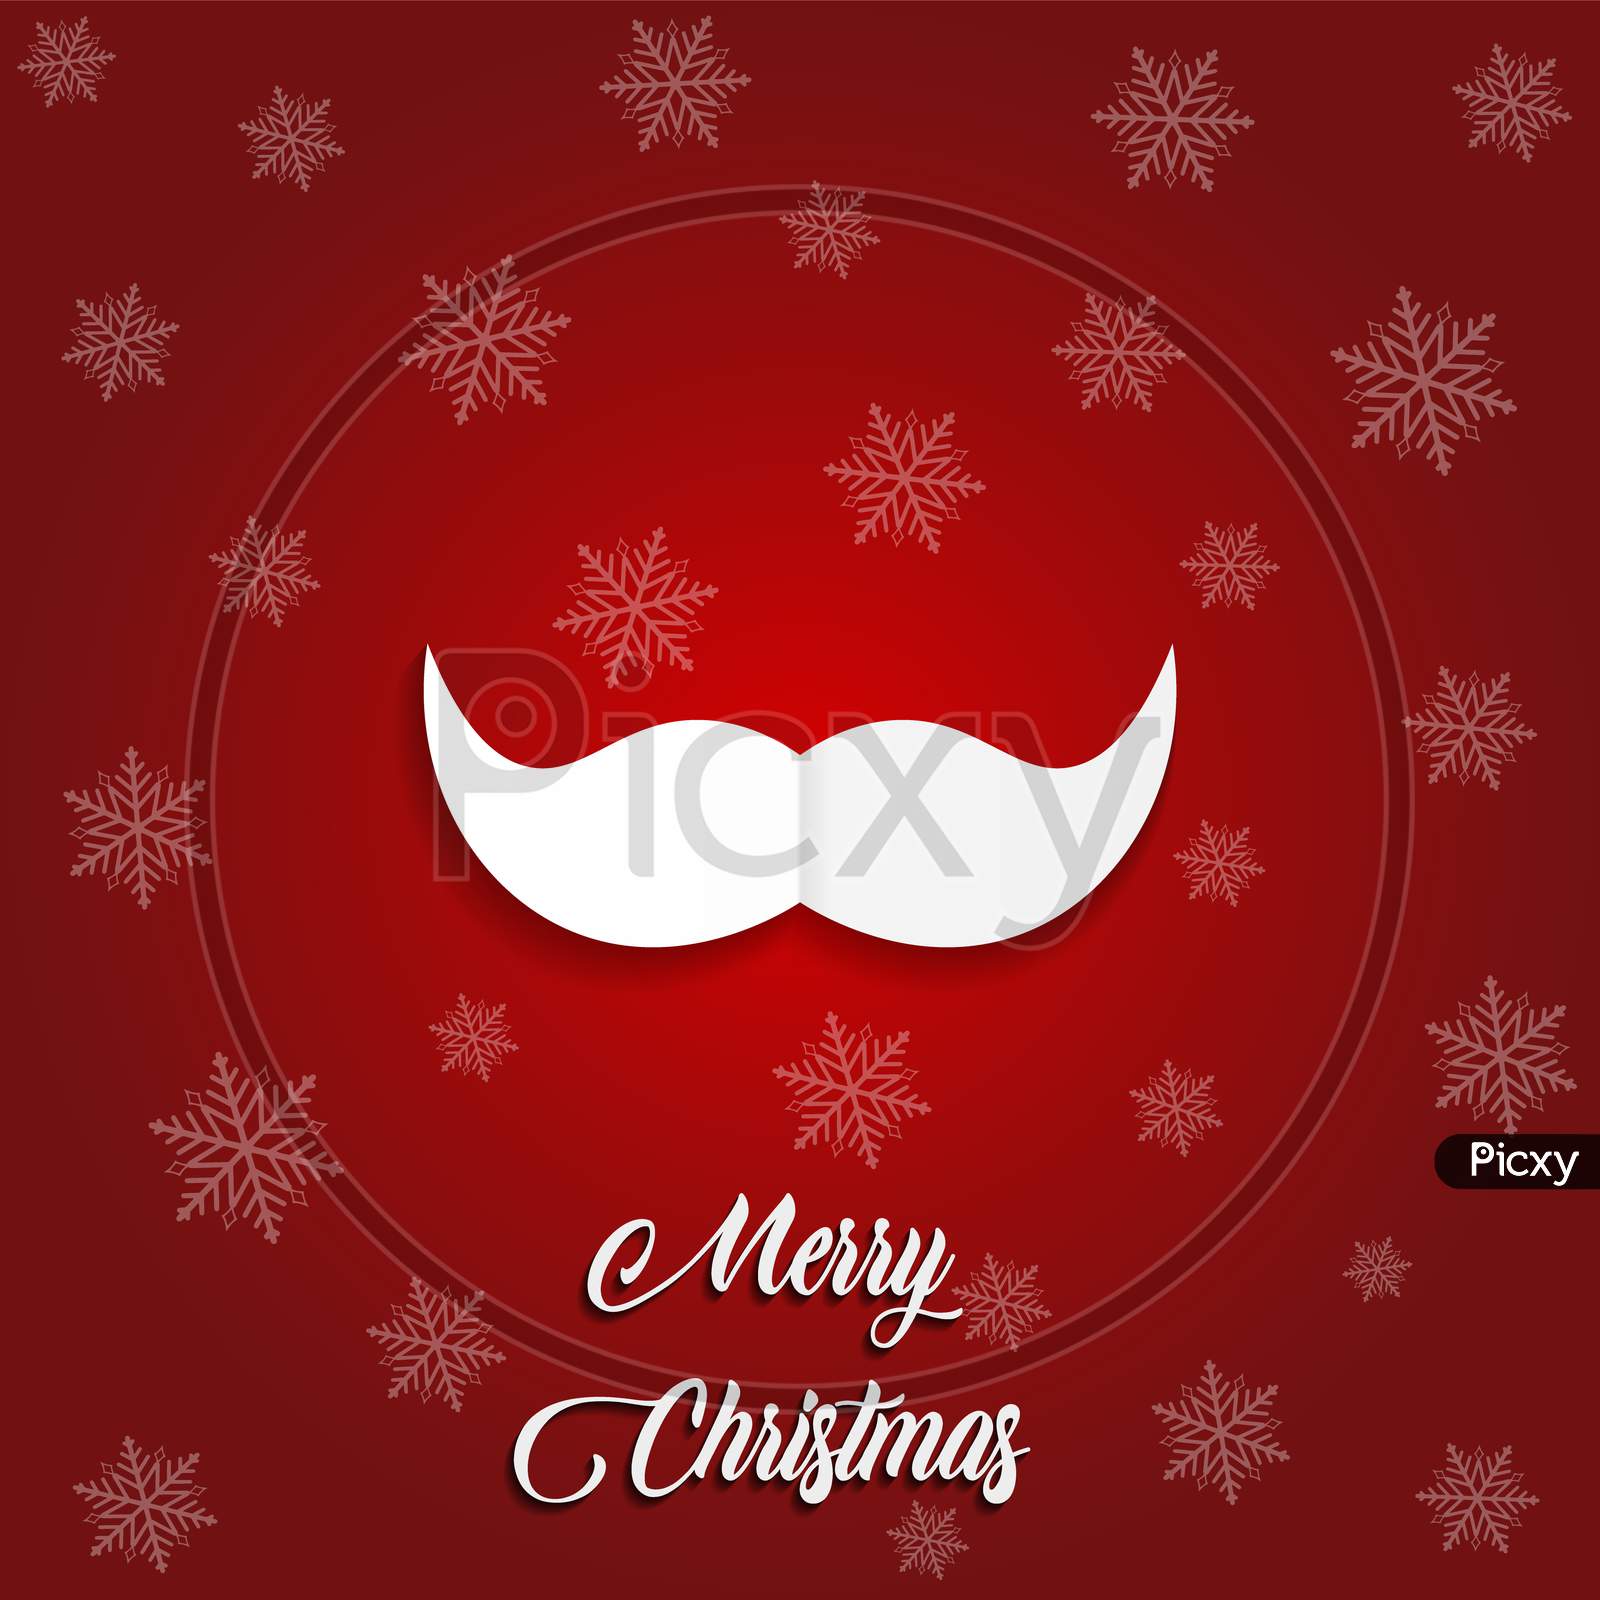 Merry Christmas wishing card with Santa Claus mustache. Vector Illustration.